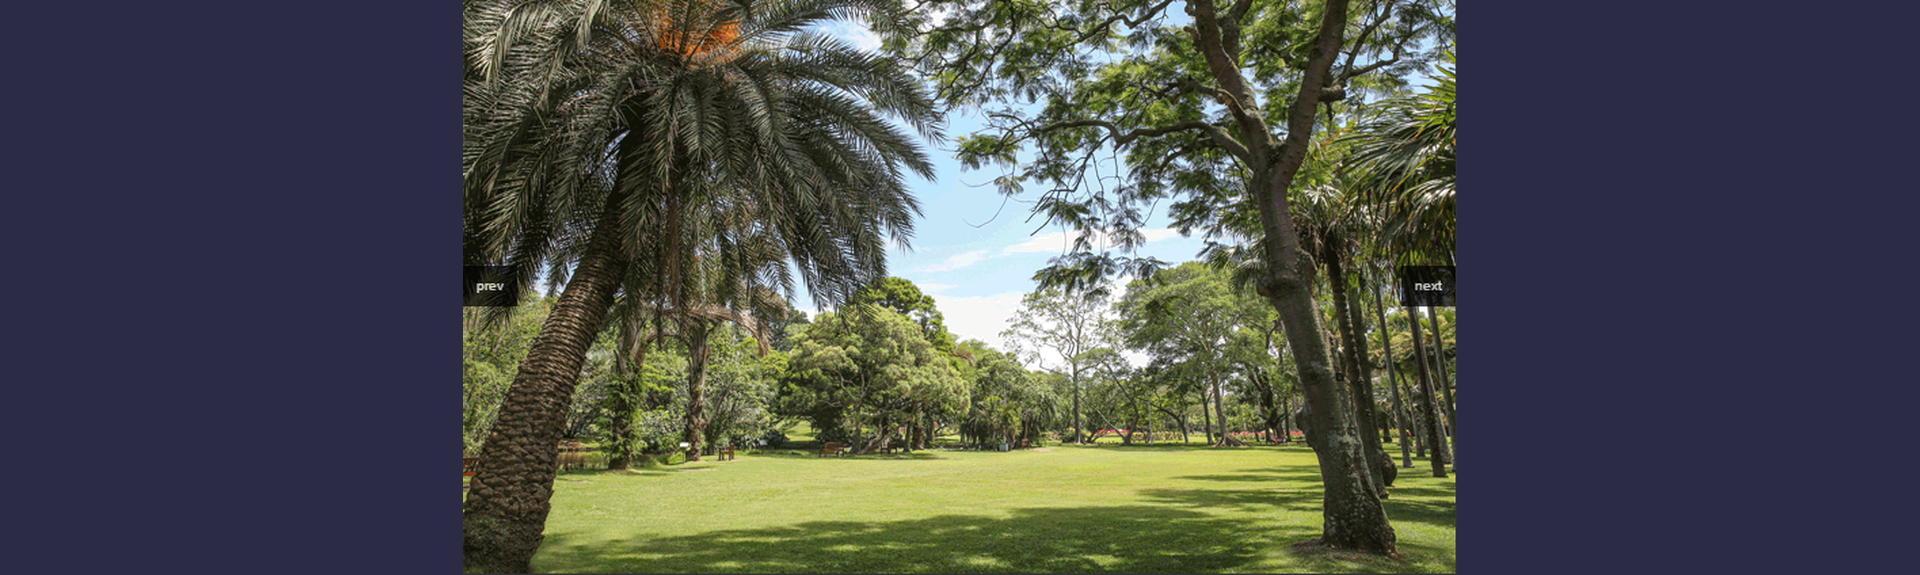 Durban Botanic Gardens|Picnic Spots|Things to do with Kids